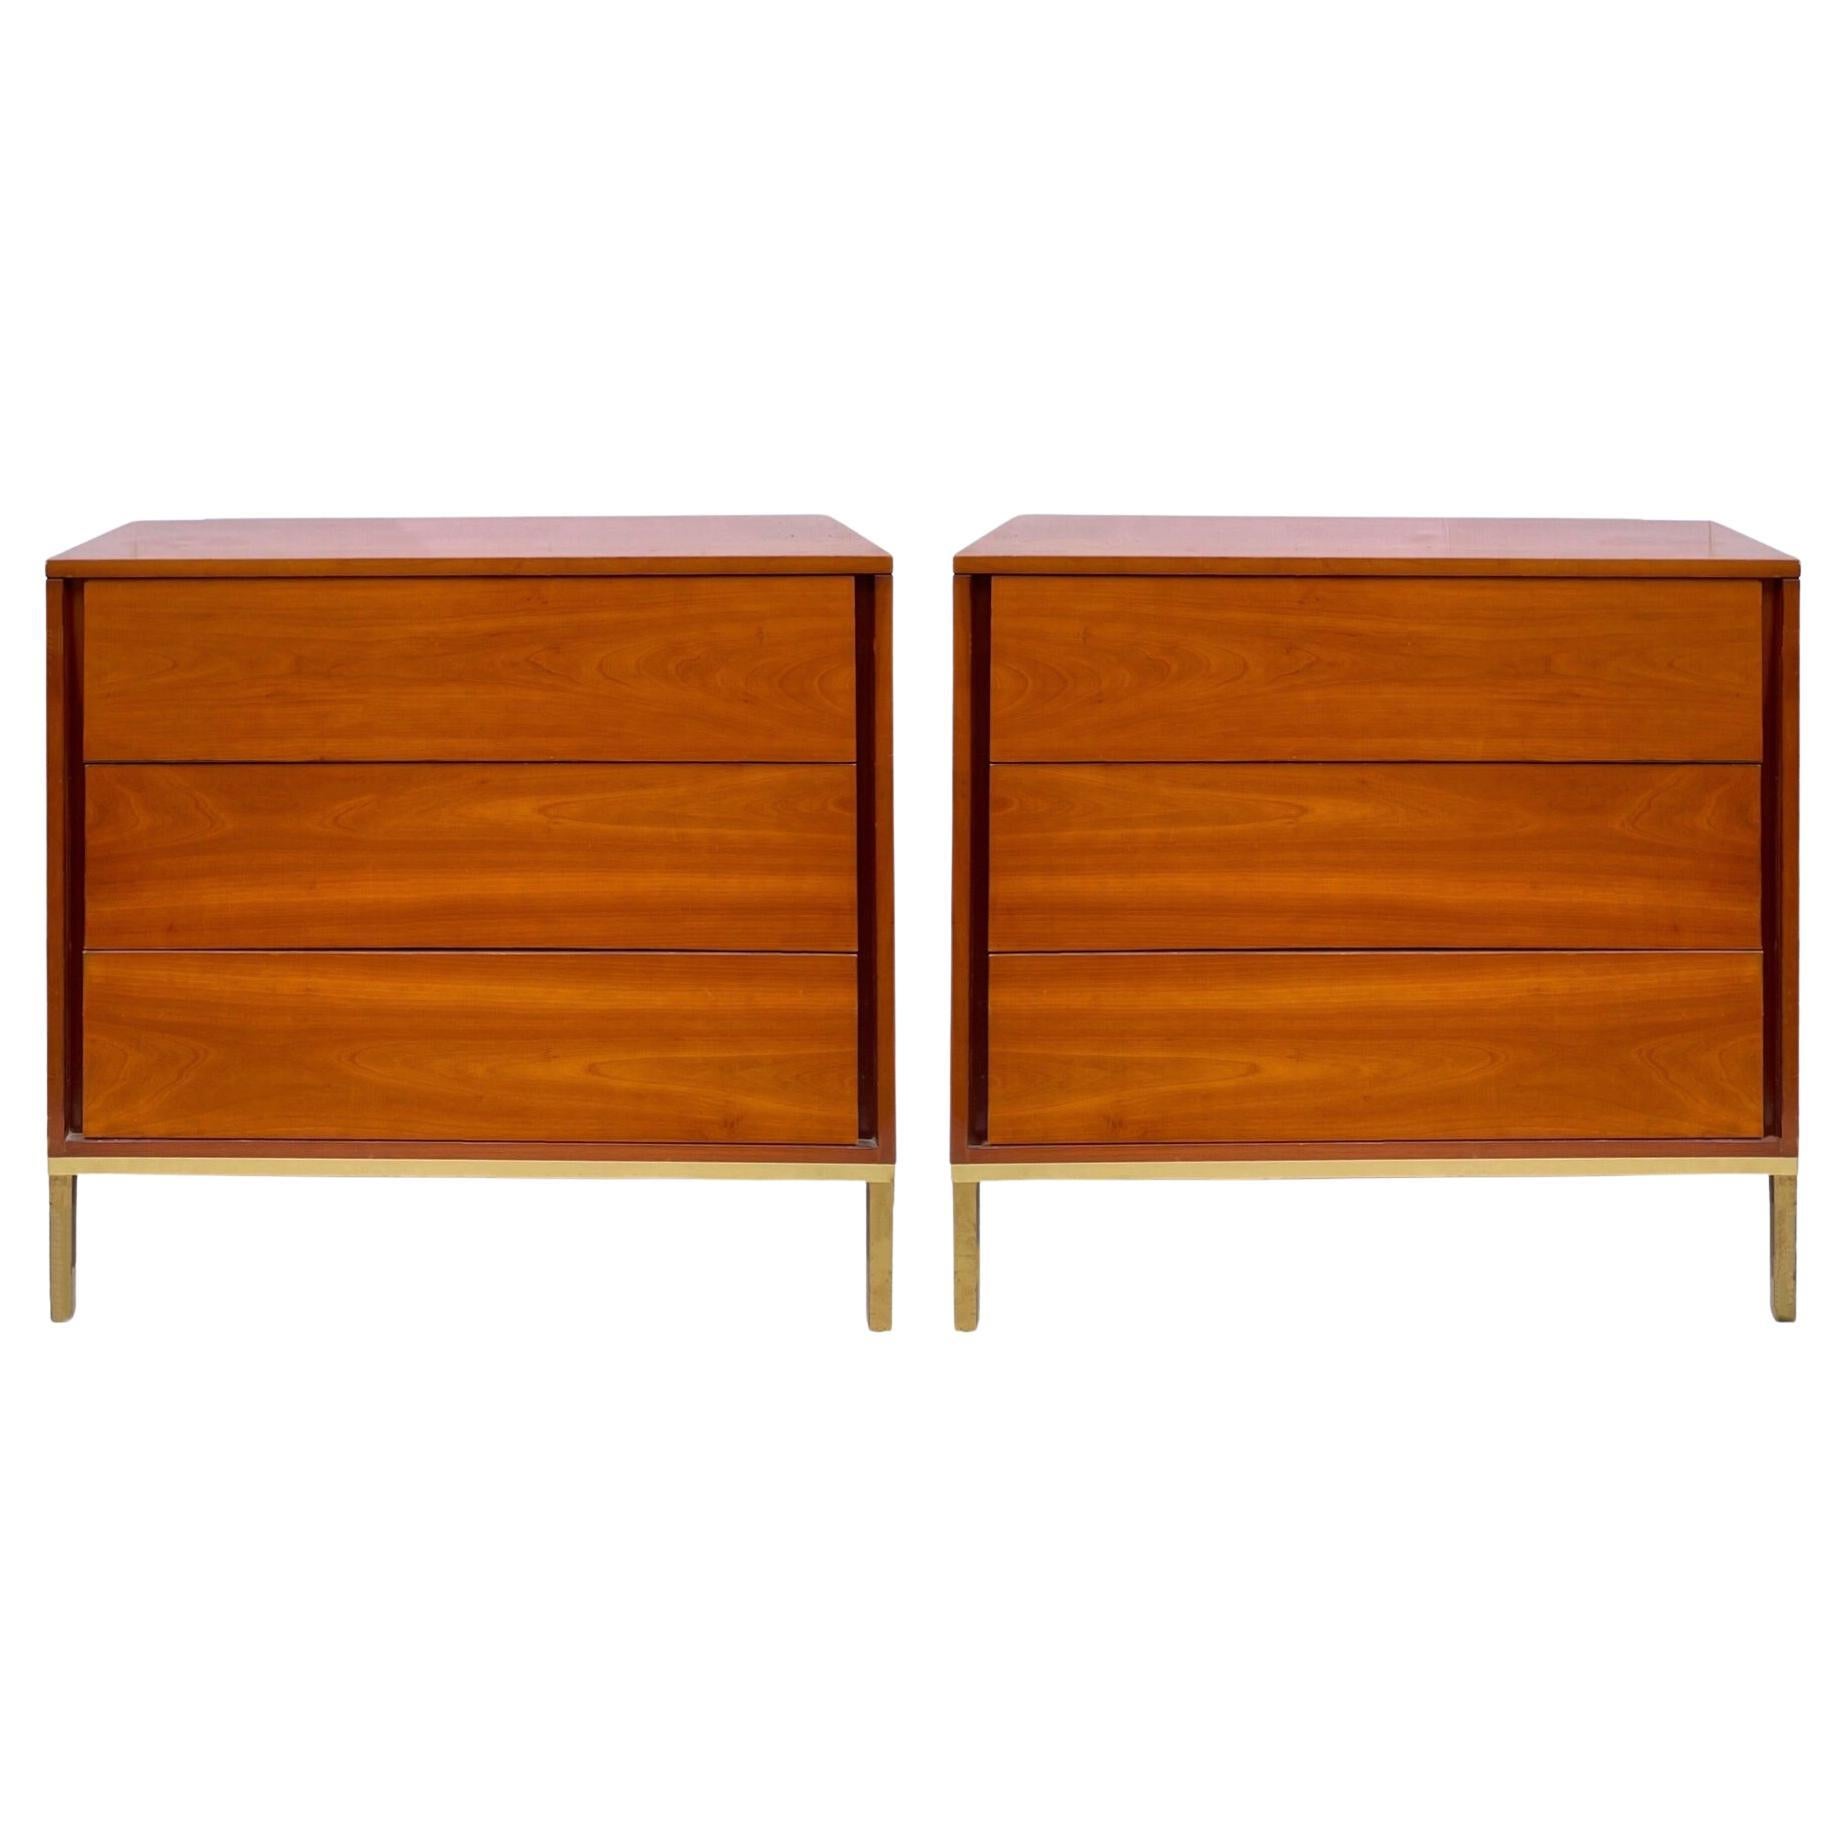 Mid-Century Modern Walnut and Brass Chests by John Stuart, Pair For Sale